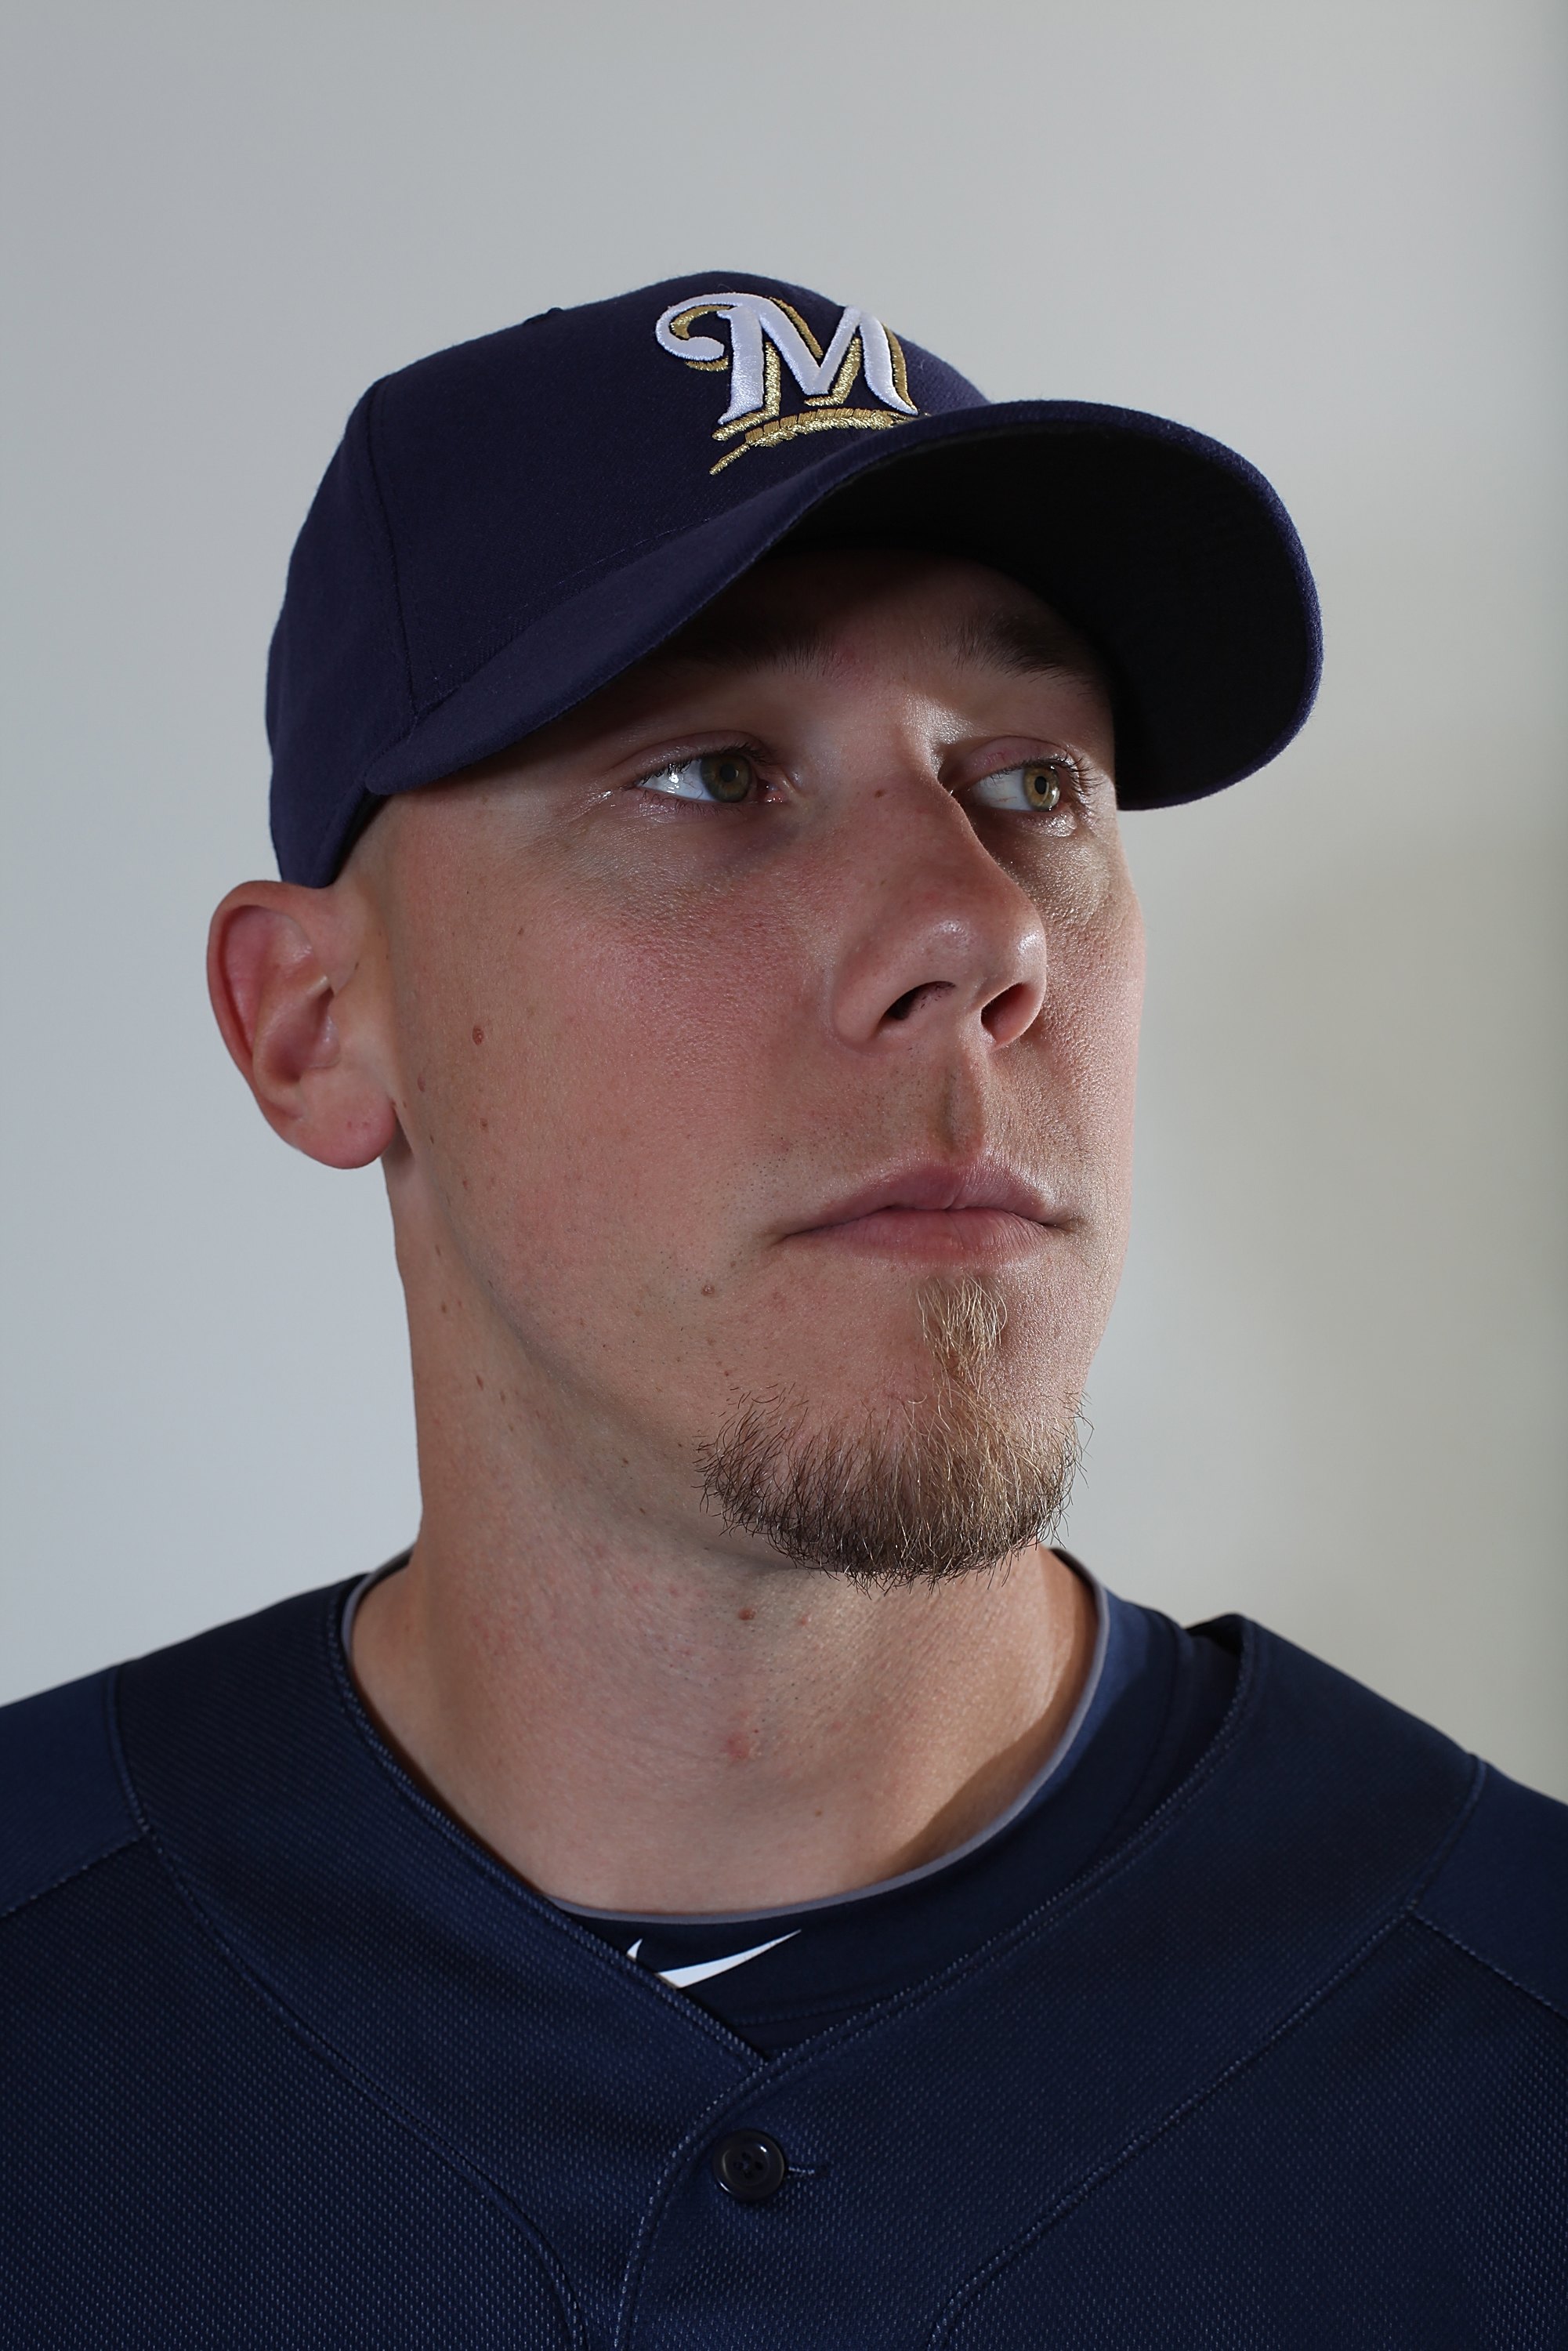 MARYVALE, AZ - MARCH 01:  Kameron Loe #73 poses for a portrait during the Milwaukee Brewers Photo Day at the Maryvale  Baseball Park on March 1, 2010 in Maryvale, Arizona.  (Photo by Jonathan Ferrey/Getty Images)